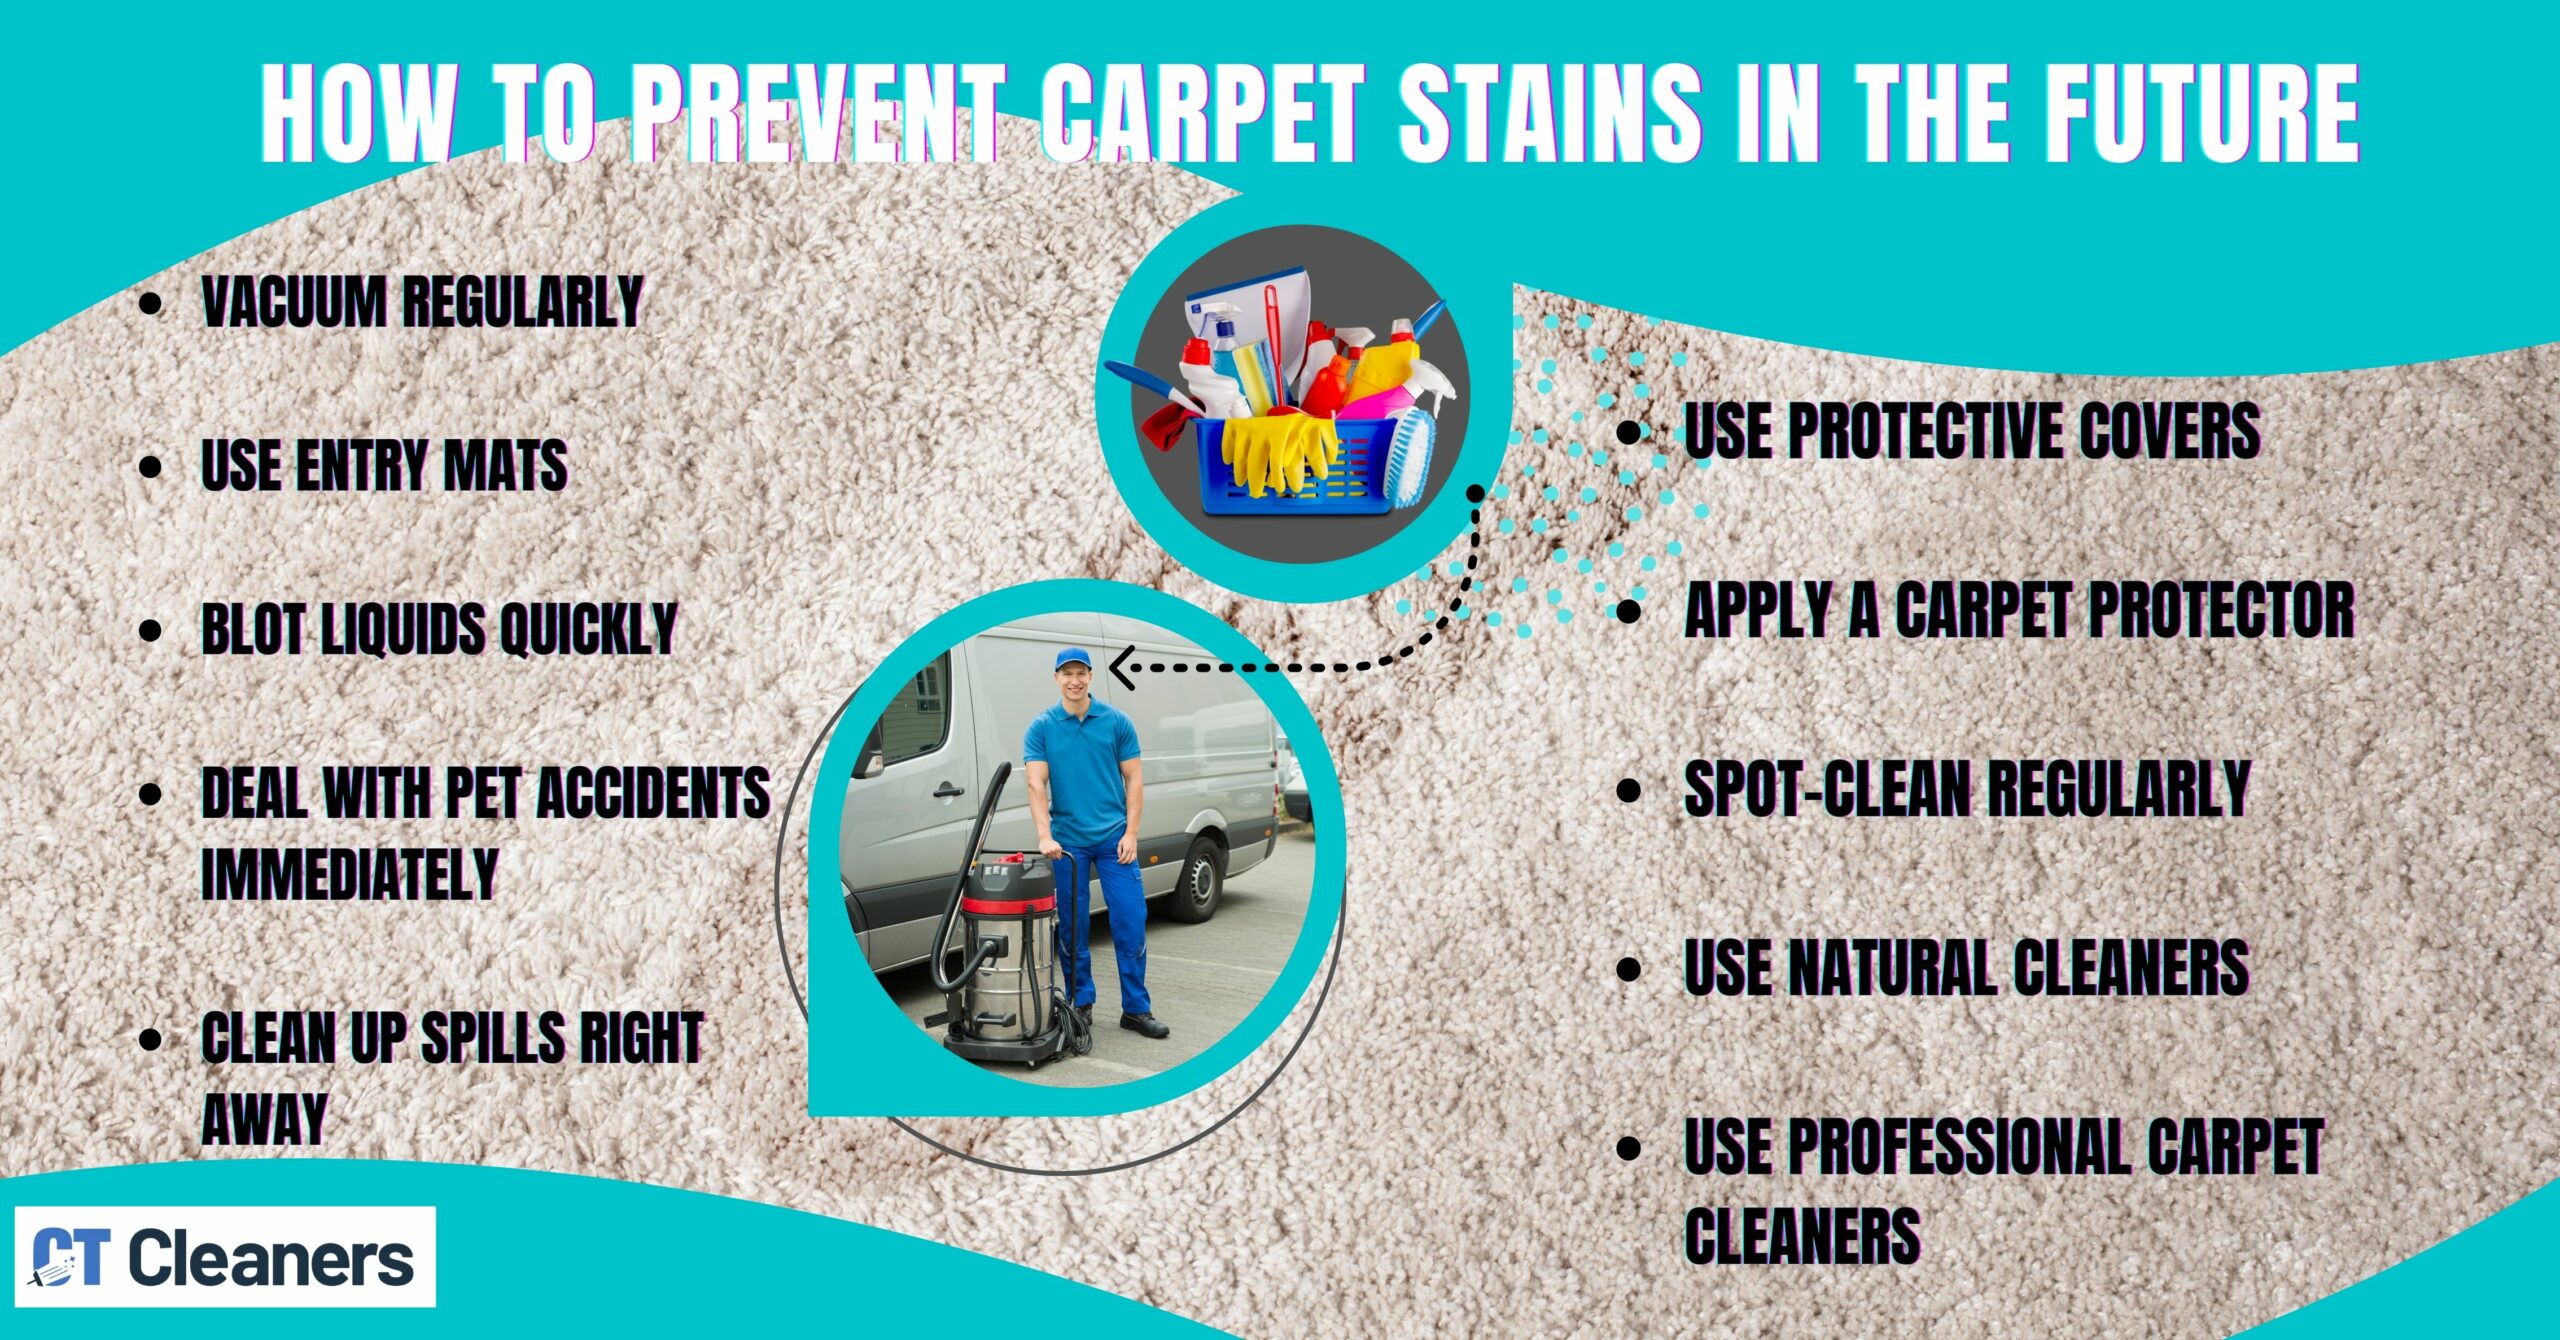 How to Prevent Carpet Stains in the Future